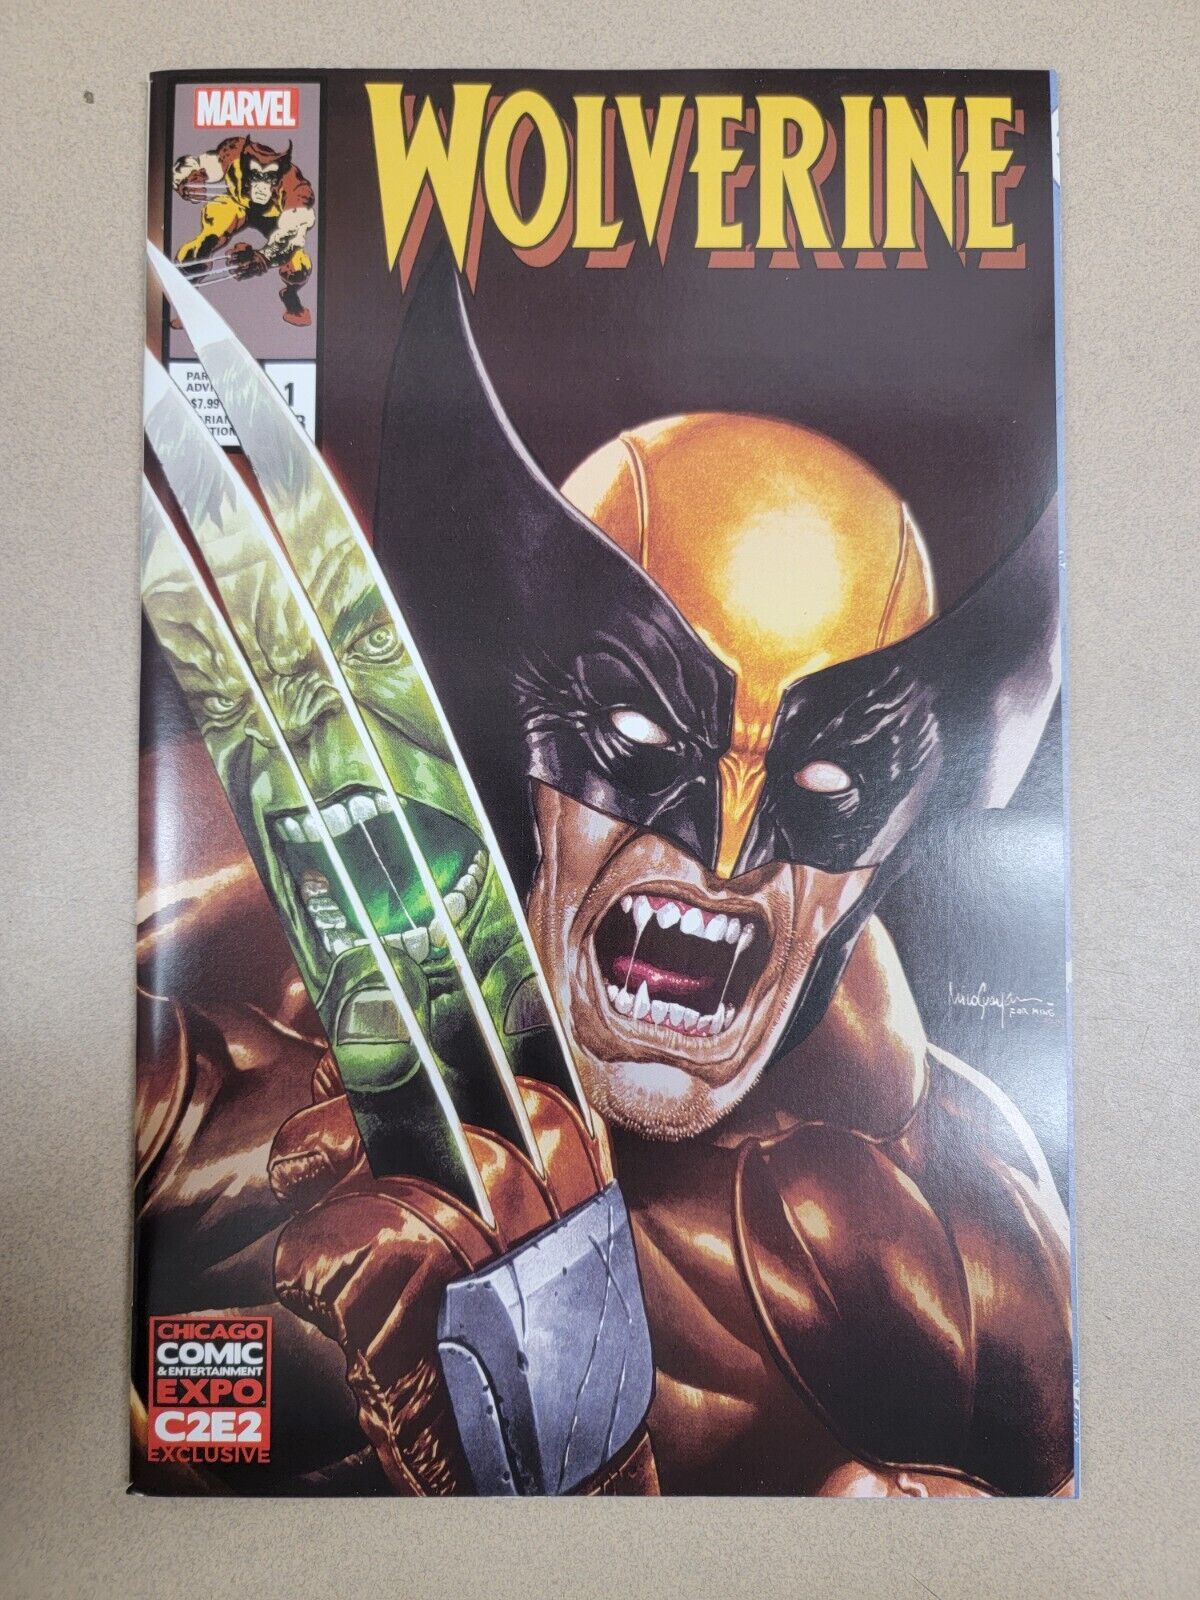 Wolverine #1 April 2020 Variant Edition Illustrated Published By Marvel Comics